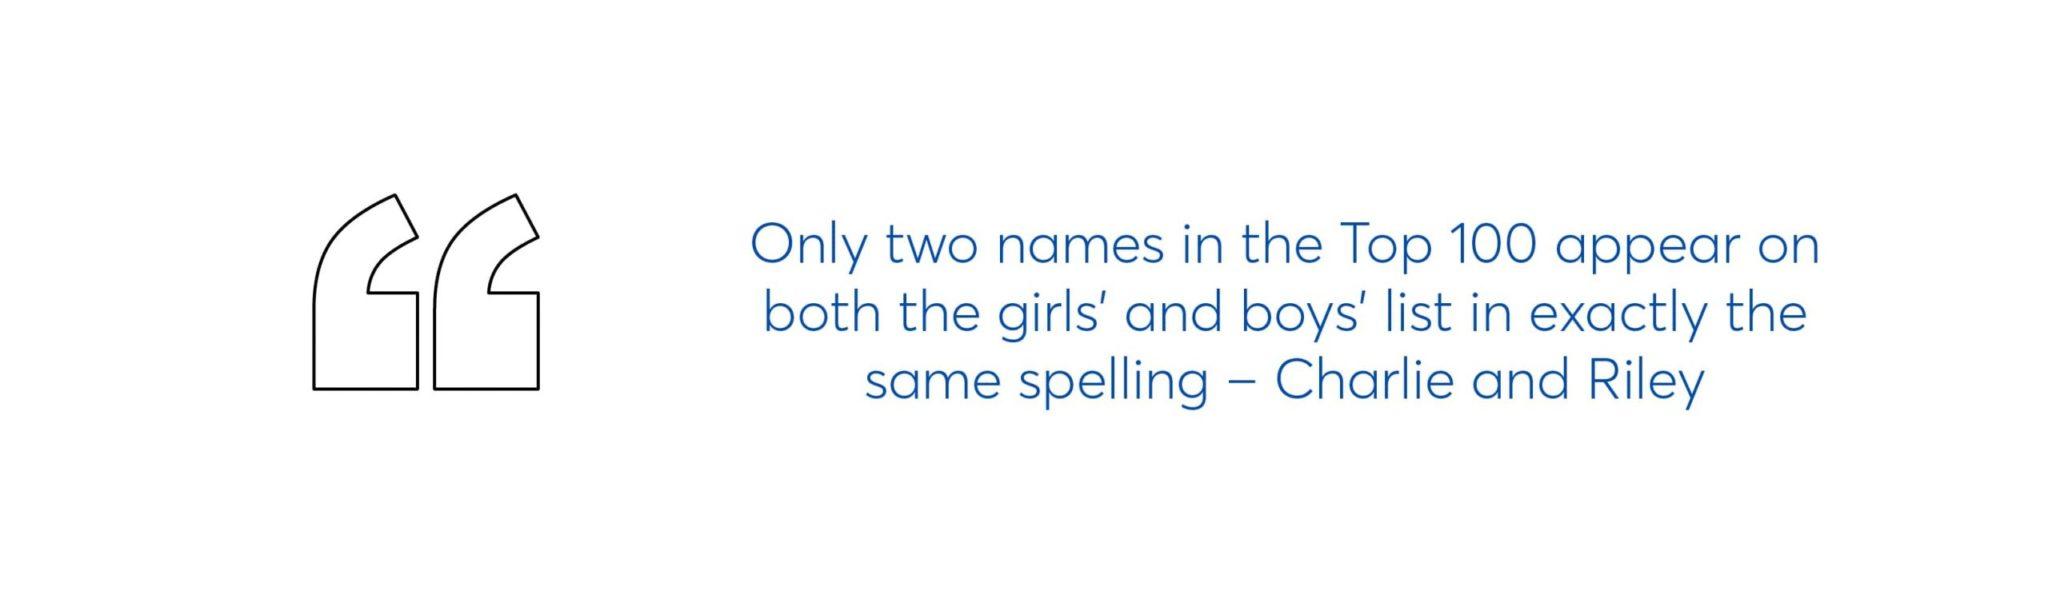 text graphic which says Only two names in the Top 100 appear on both the girls’ and boys’ list in exactly the same spelling – Charlie and riley